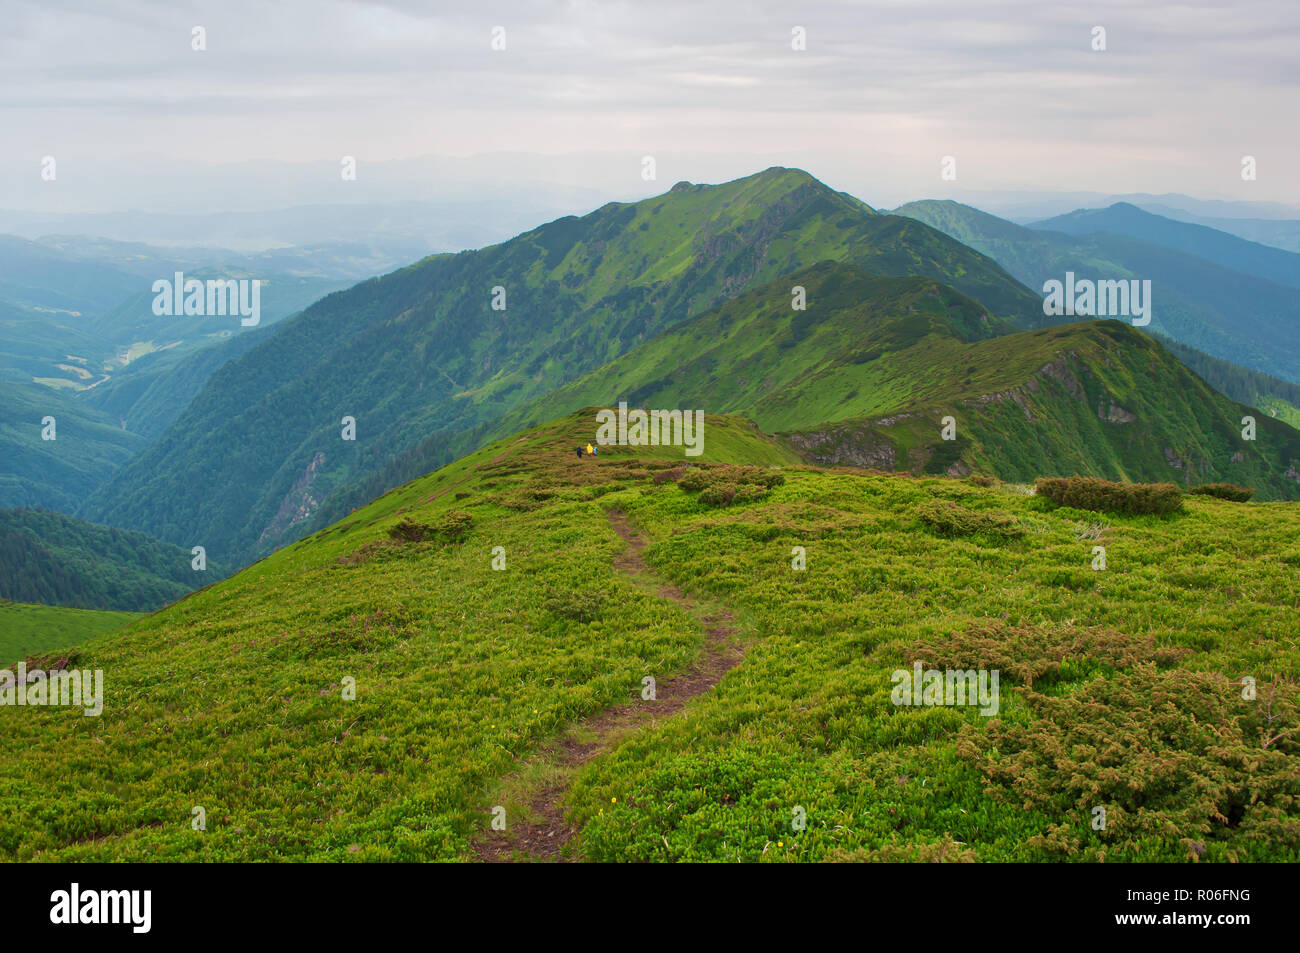 Small figures of travelers descending down a winding path leading to majestic mountain peak and hills covered in green lush grass. Sunny cloudy day in Stock Photo